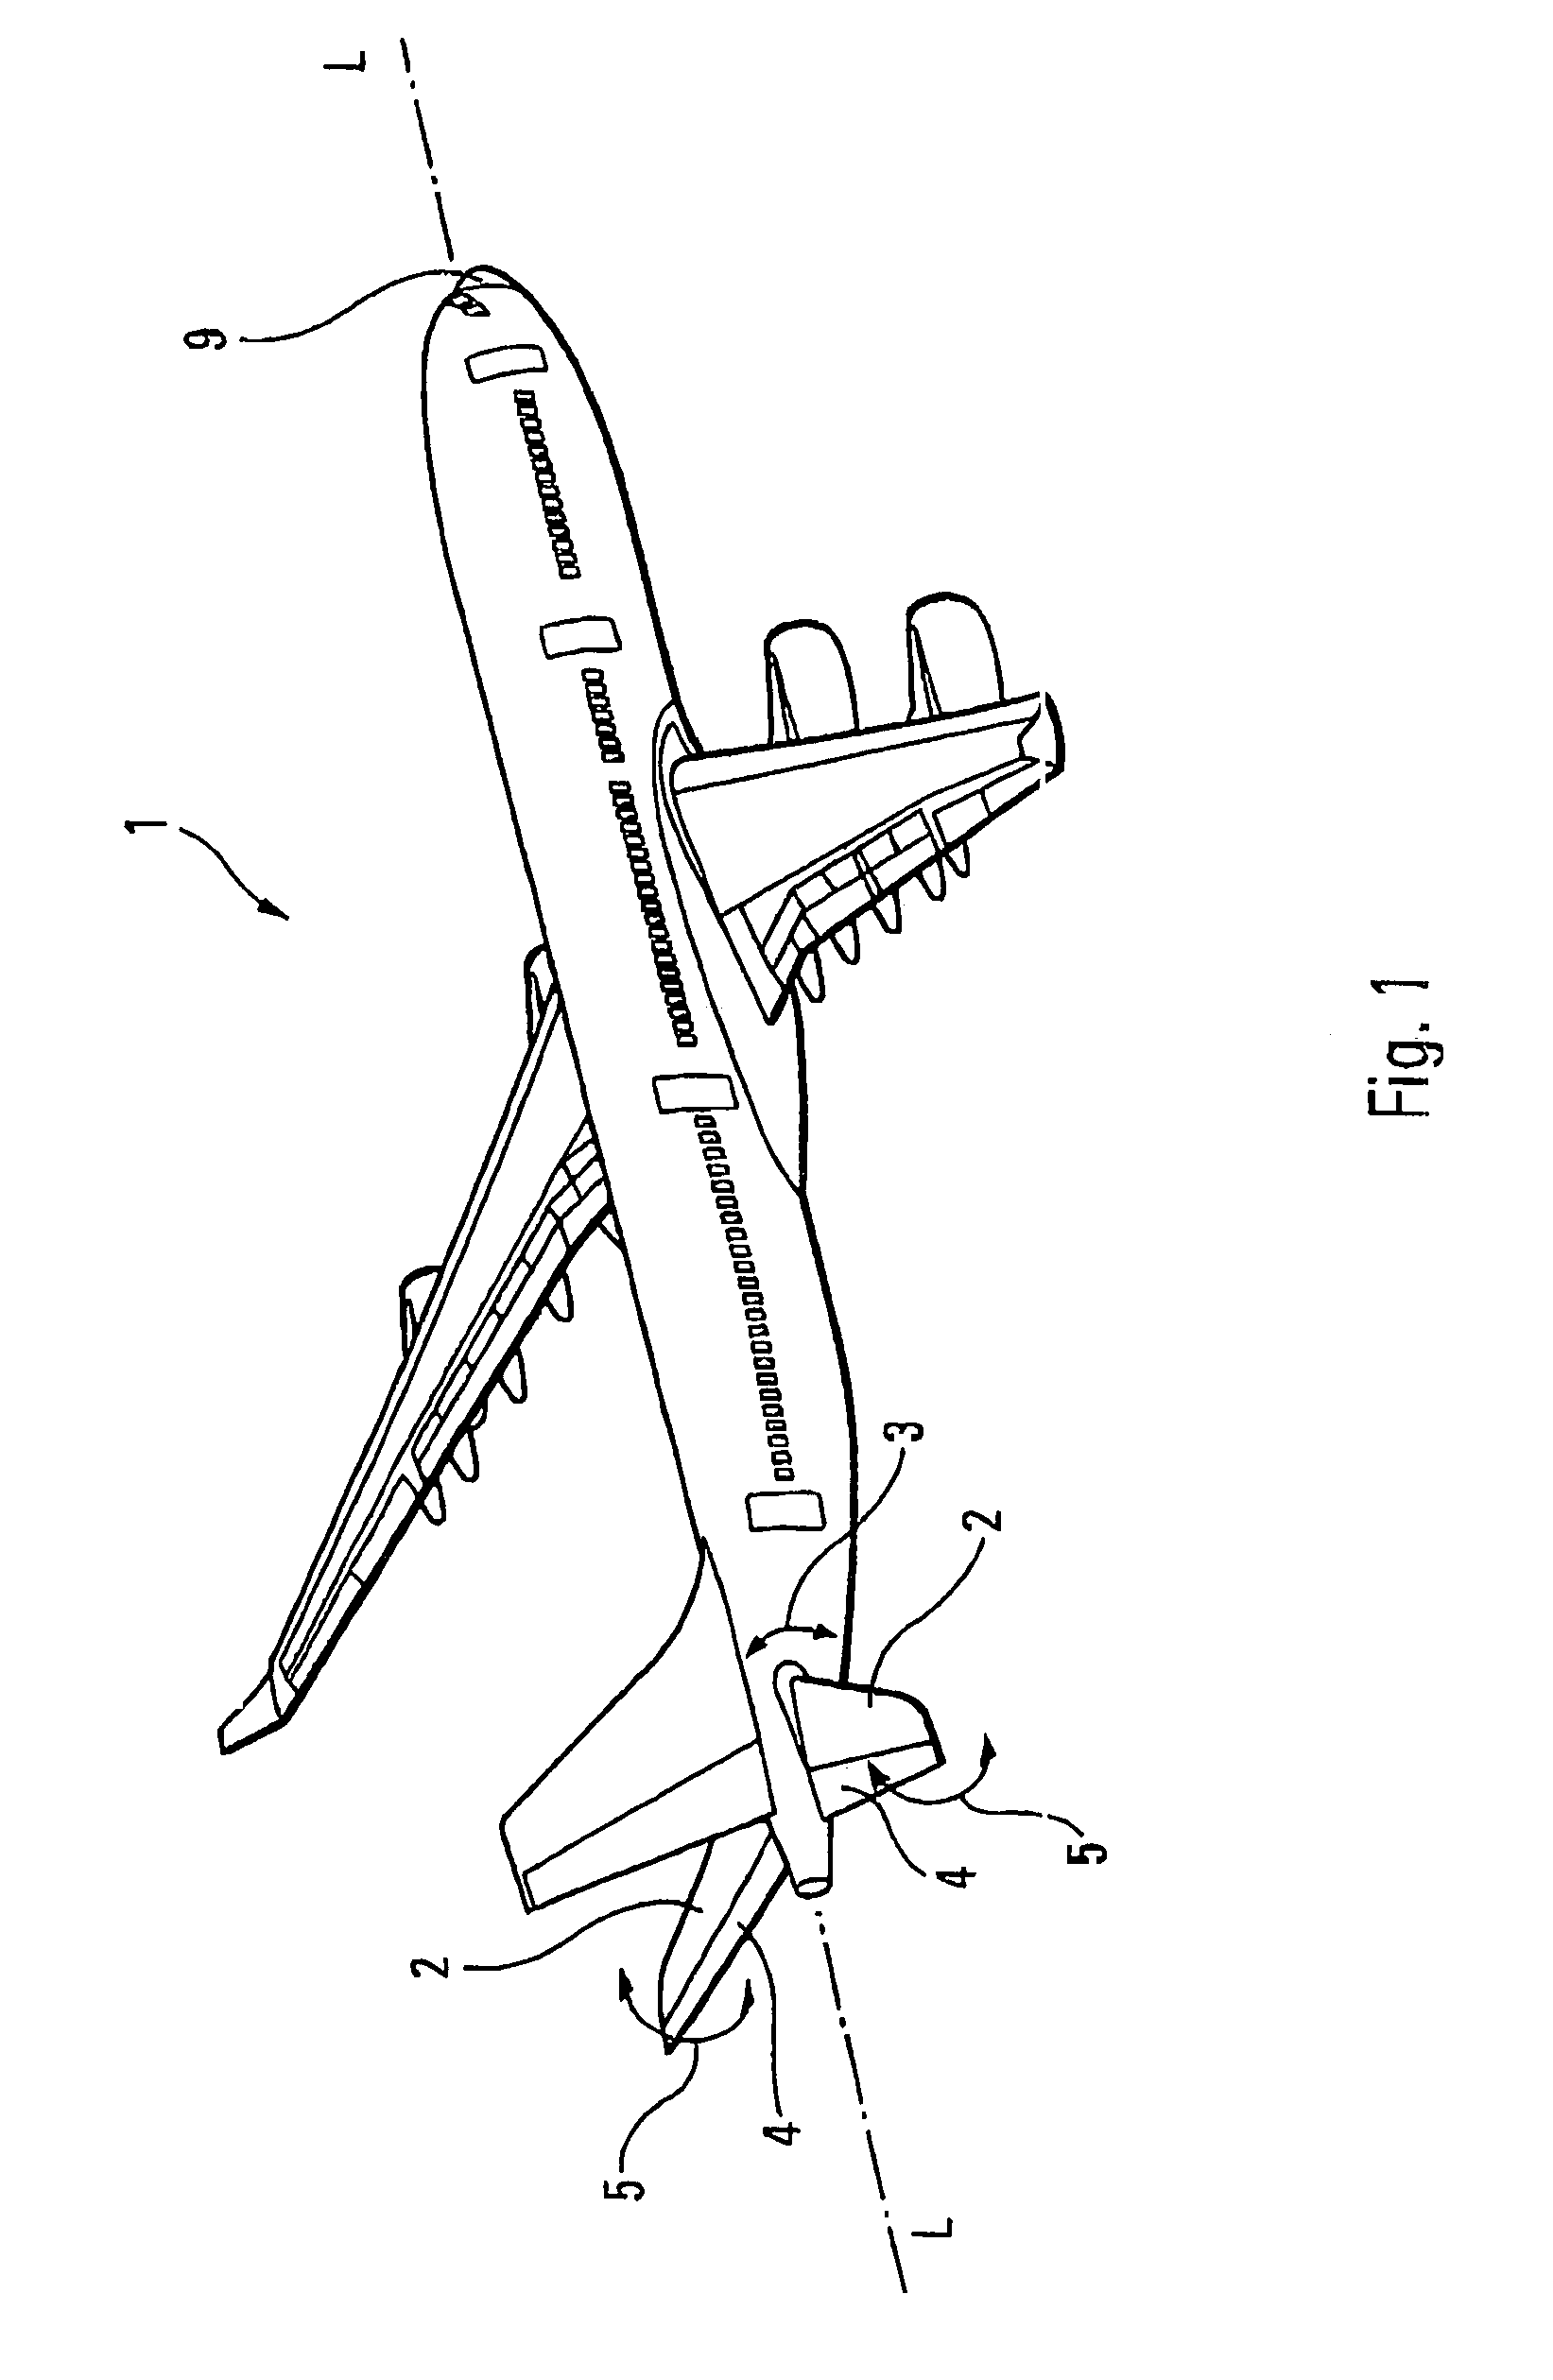 Process for improving the landing of an aircraft